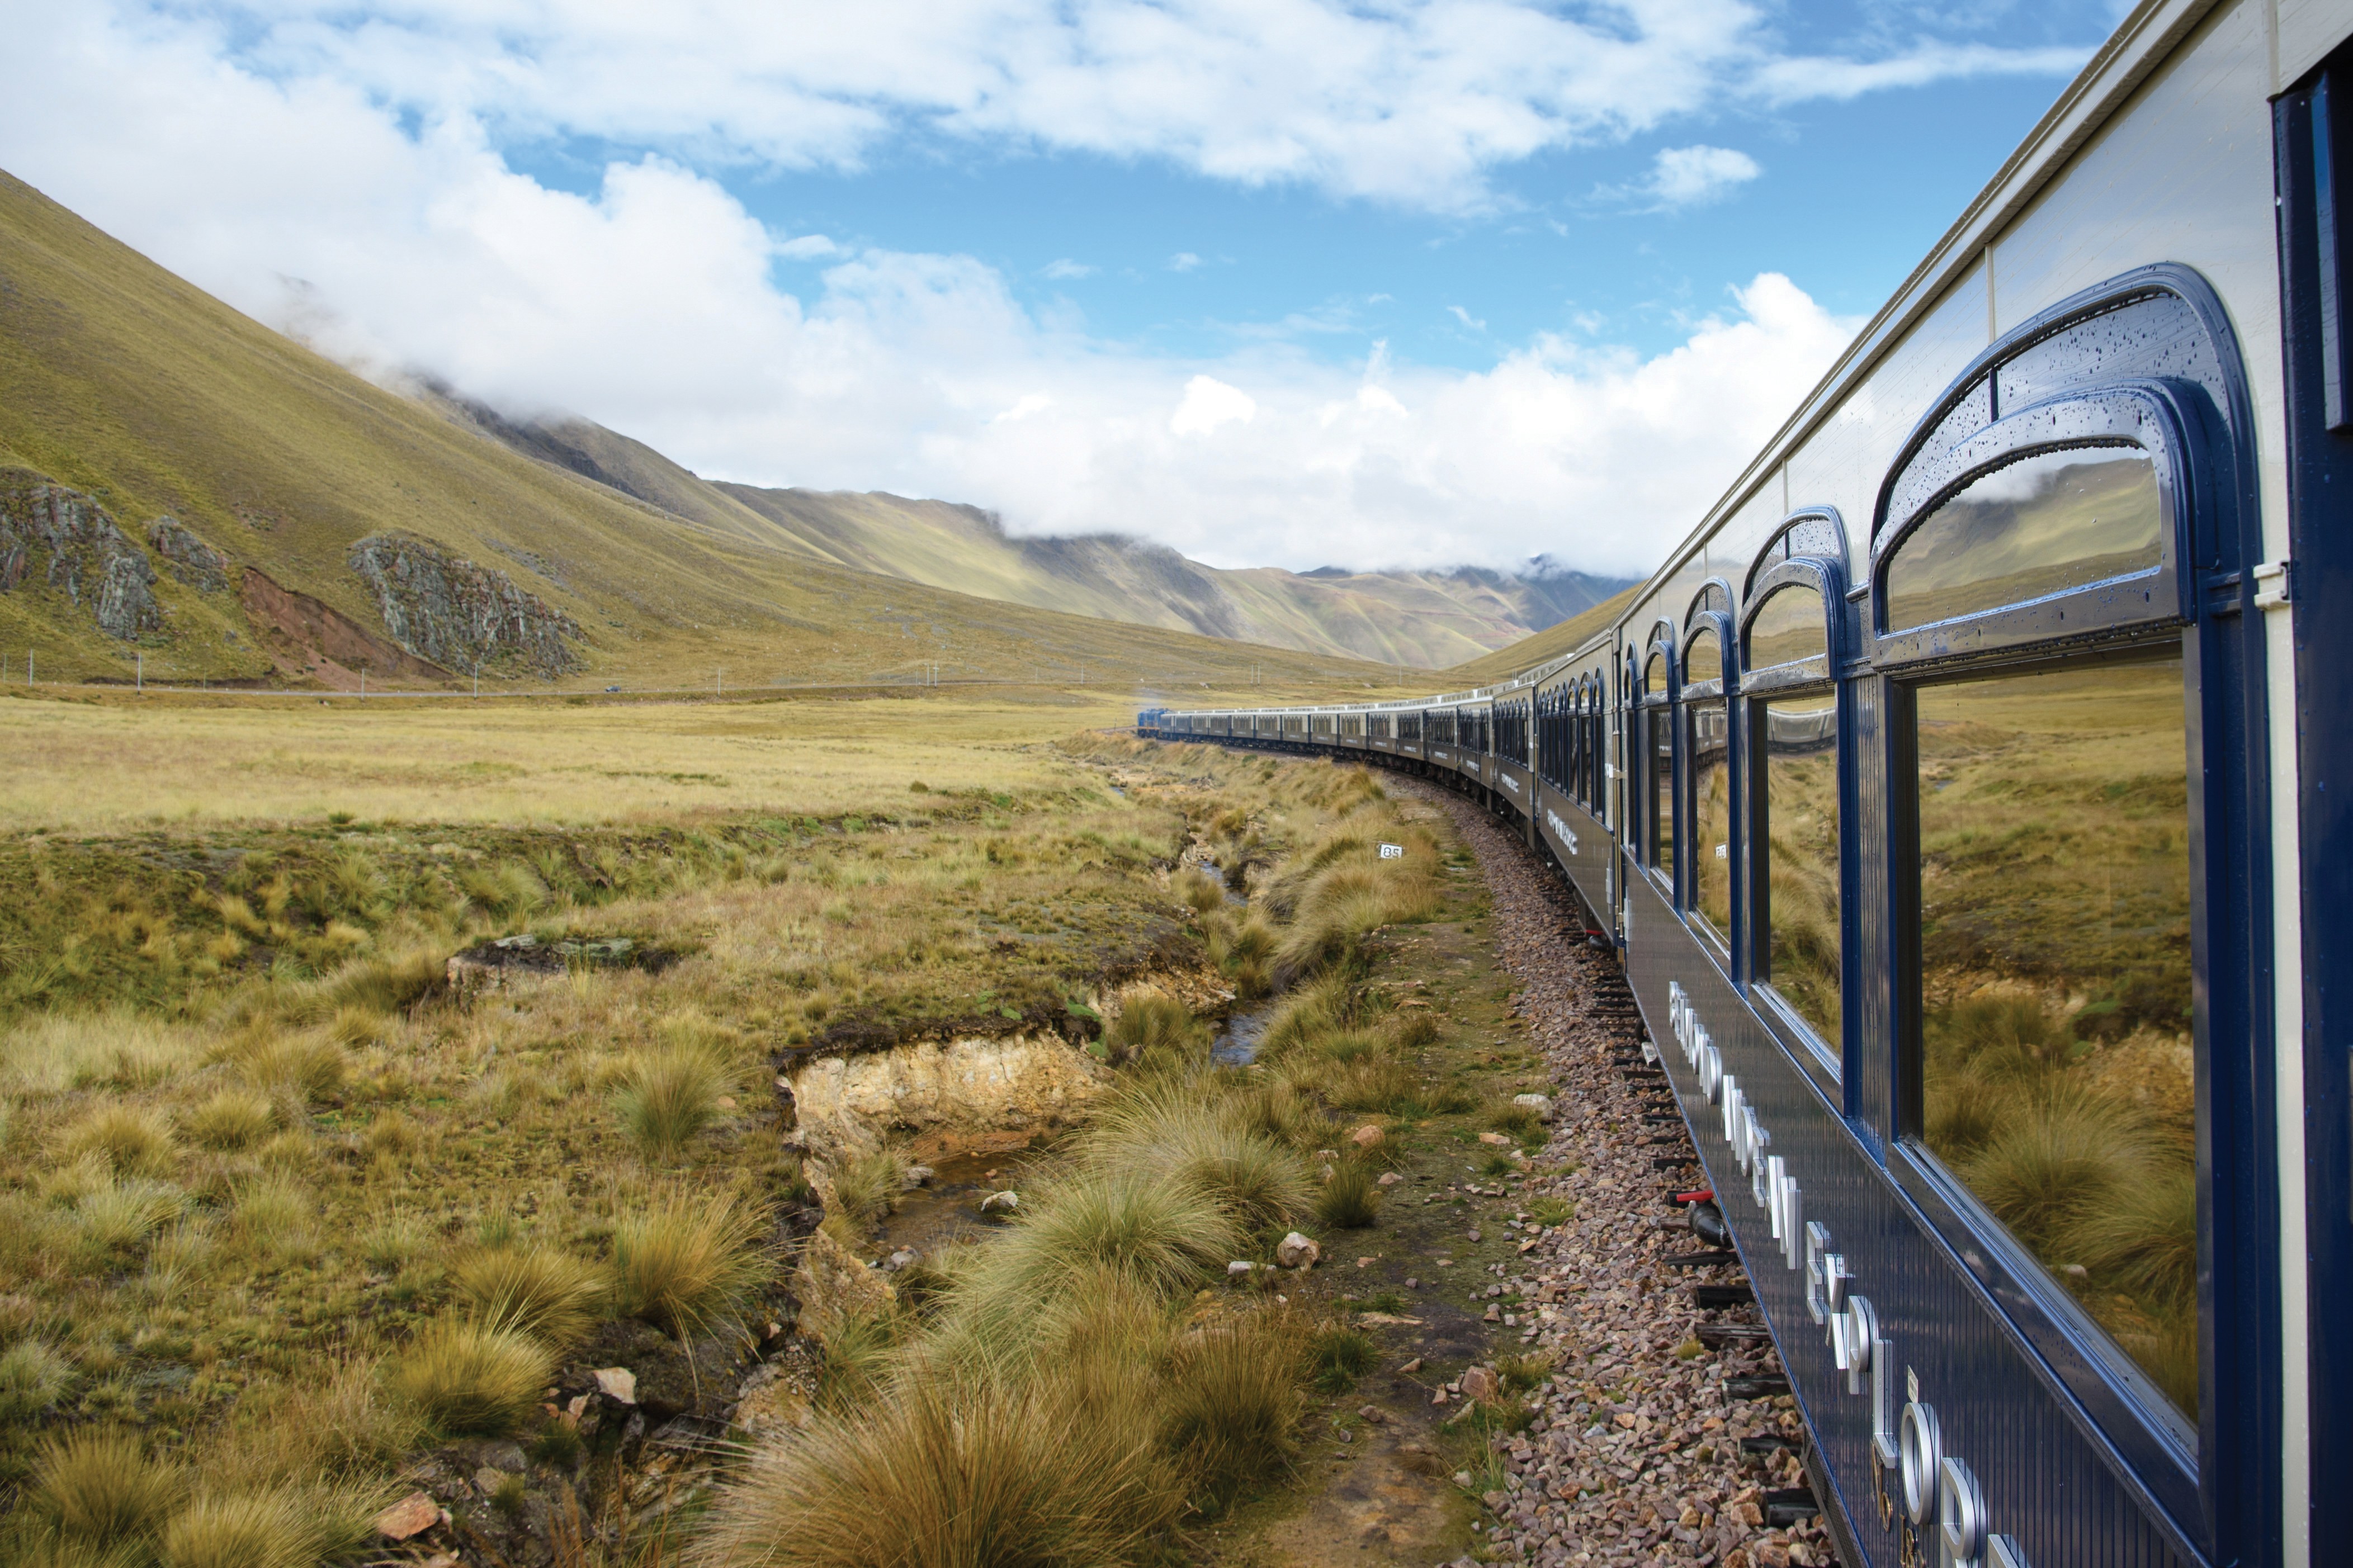 The Belmond Andean Explorer passes through La Raya, Peru, during its journey between Arequipa, Lake Titicaca and Cusco. The train cuts through some of the most breathtaking scenery in Peru. Photo: Matt Crossick